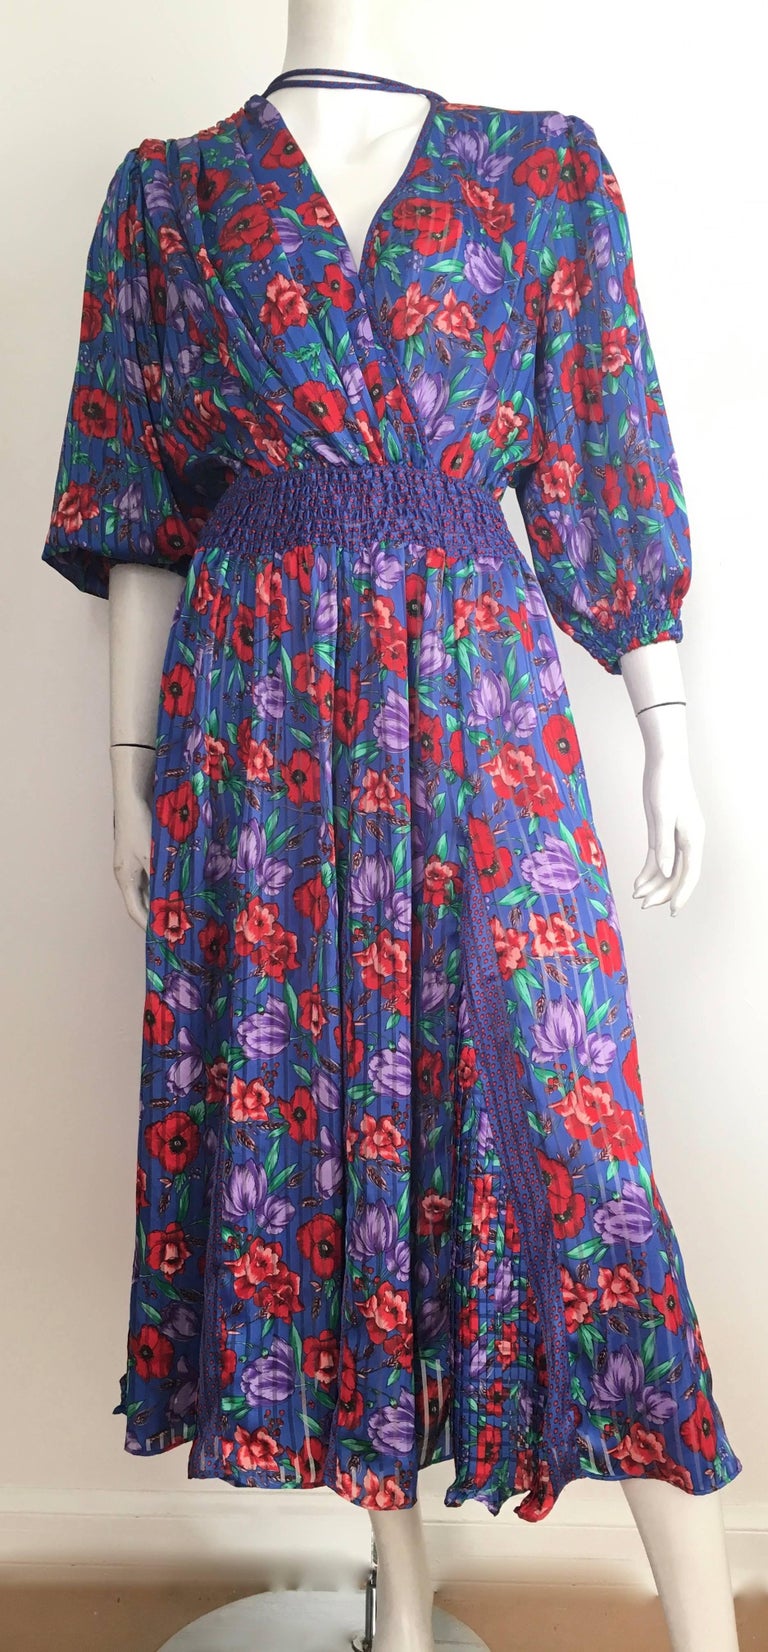 Diane Freis Floral Dress is Size Small. For Sale at 1stdibs